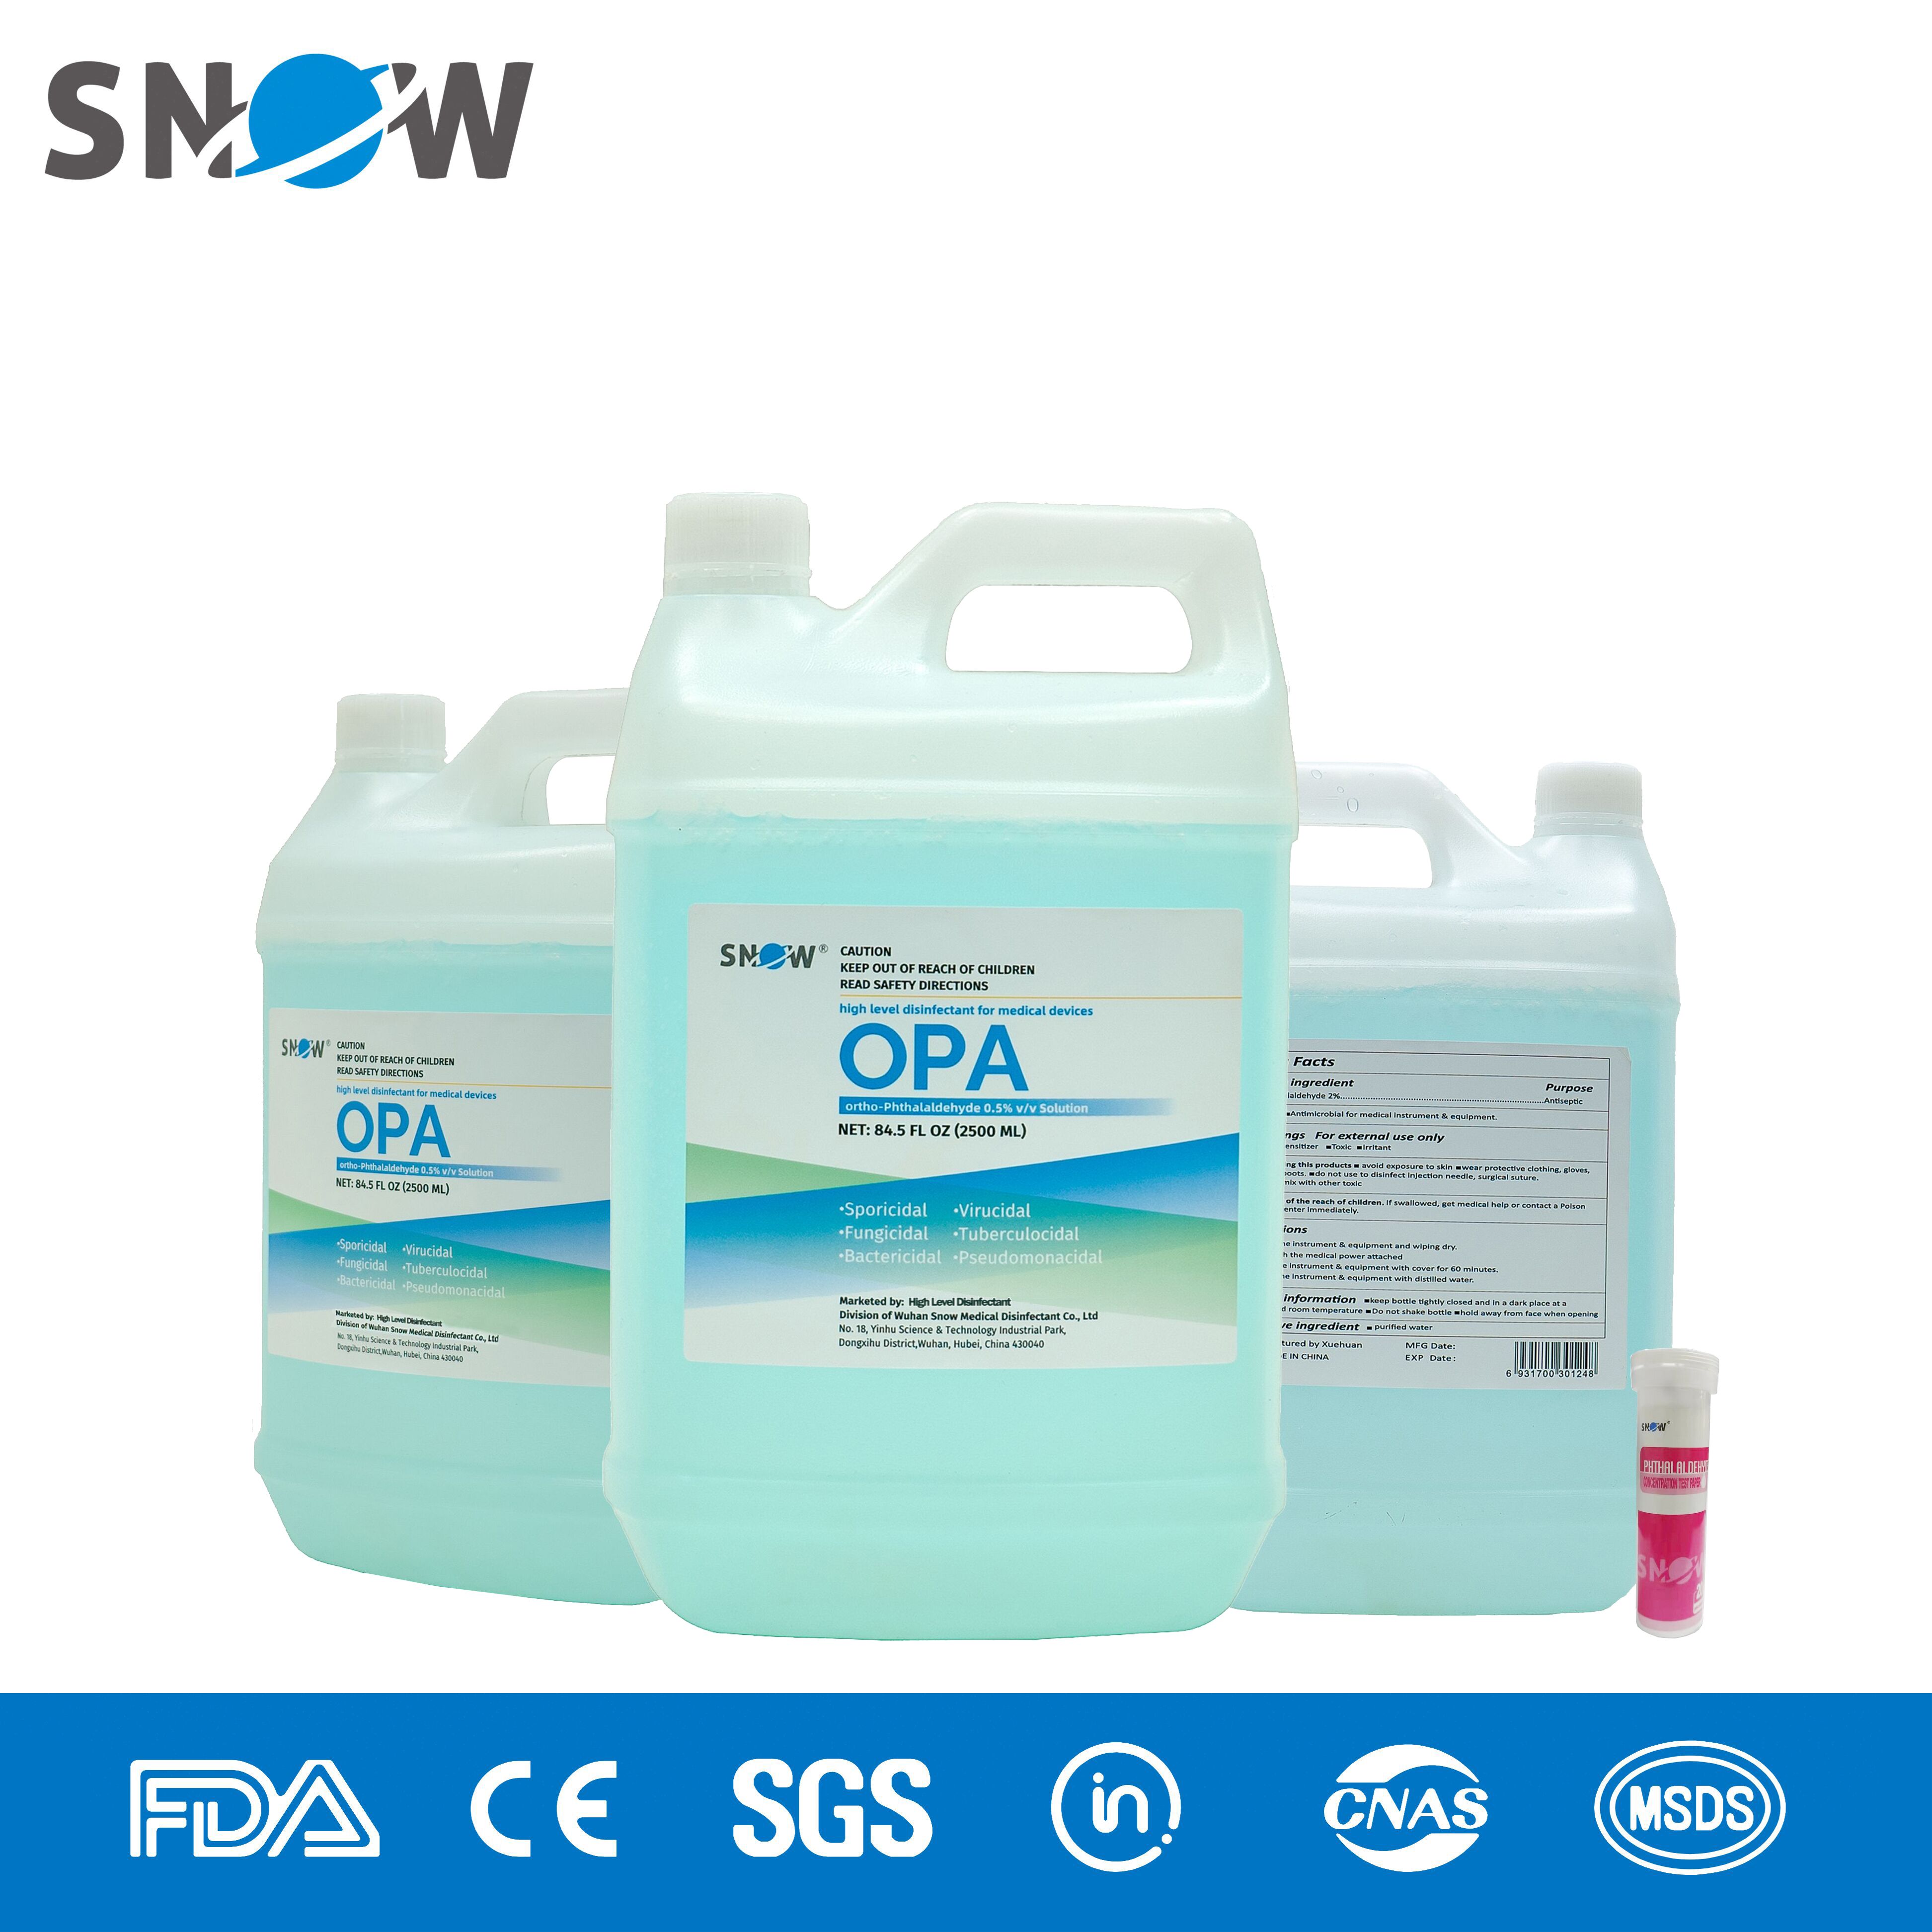 High Level OPA Disinfectant